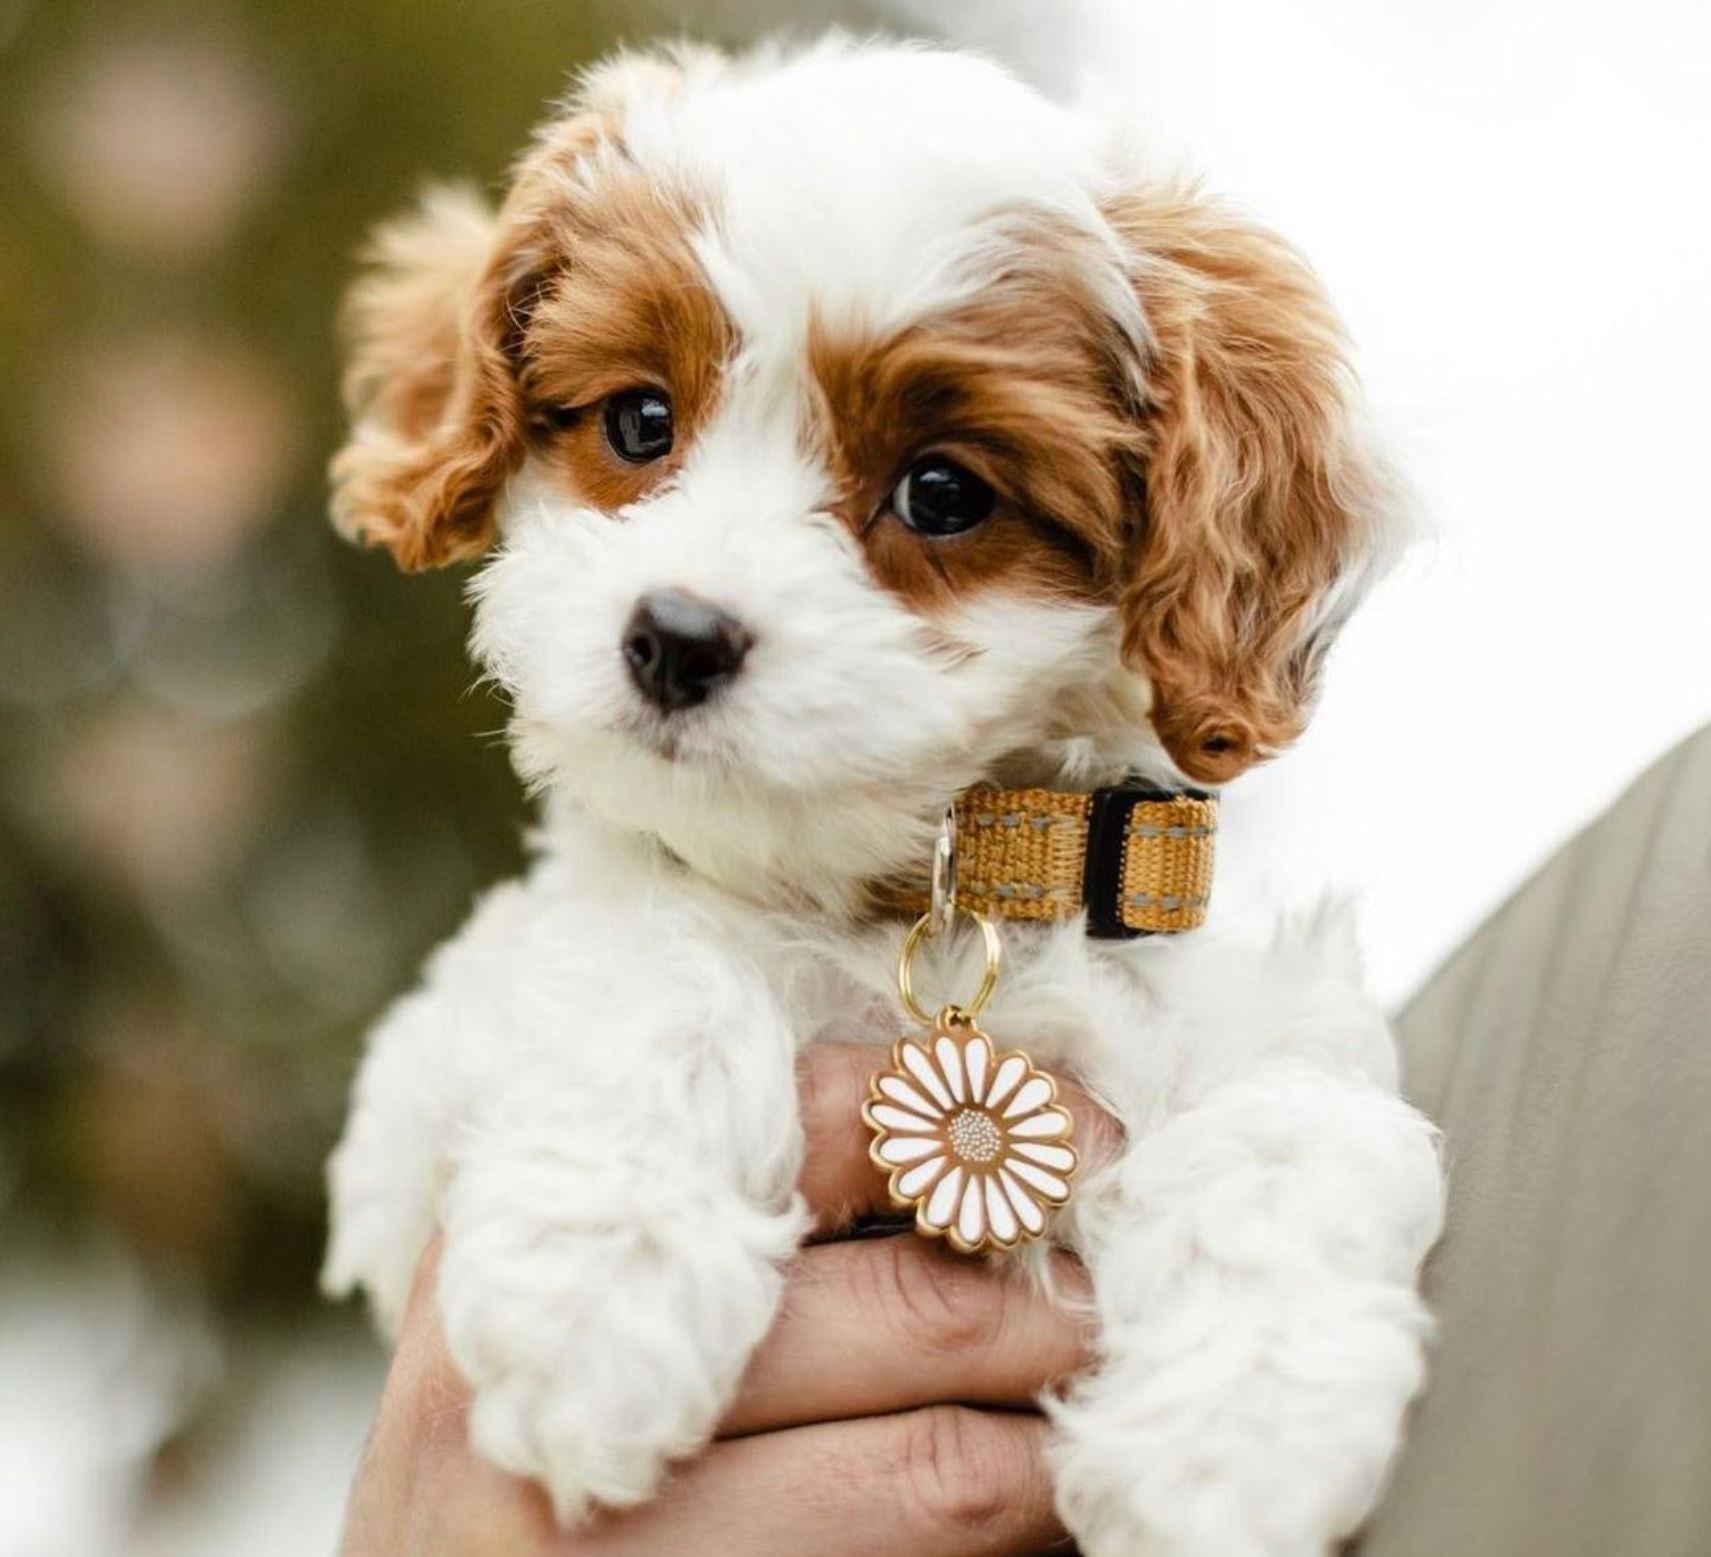 Cute Cavalier King Charles Spaniel puppy with a custom daisy flower pet ID tag on a chic tweed collar posing for a portrait.